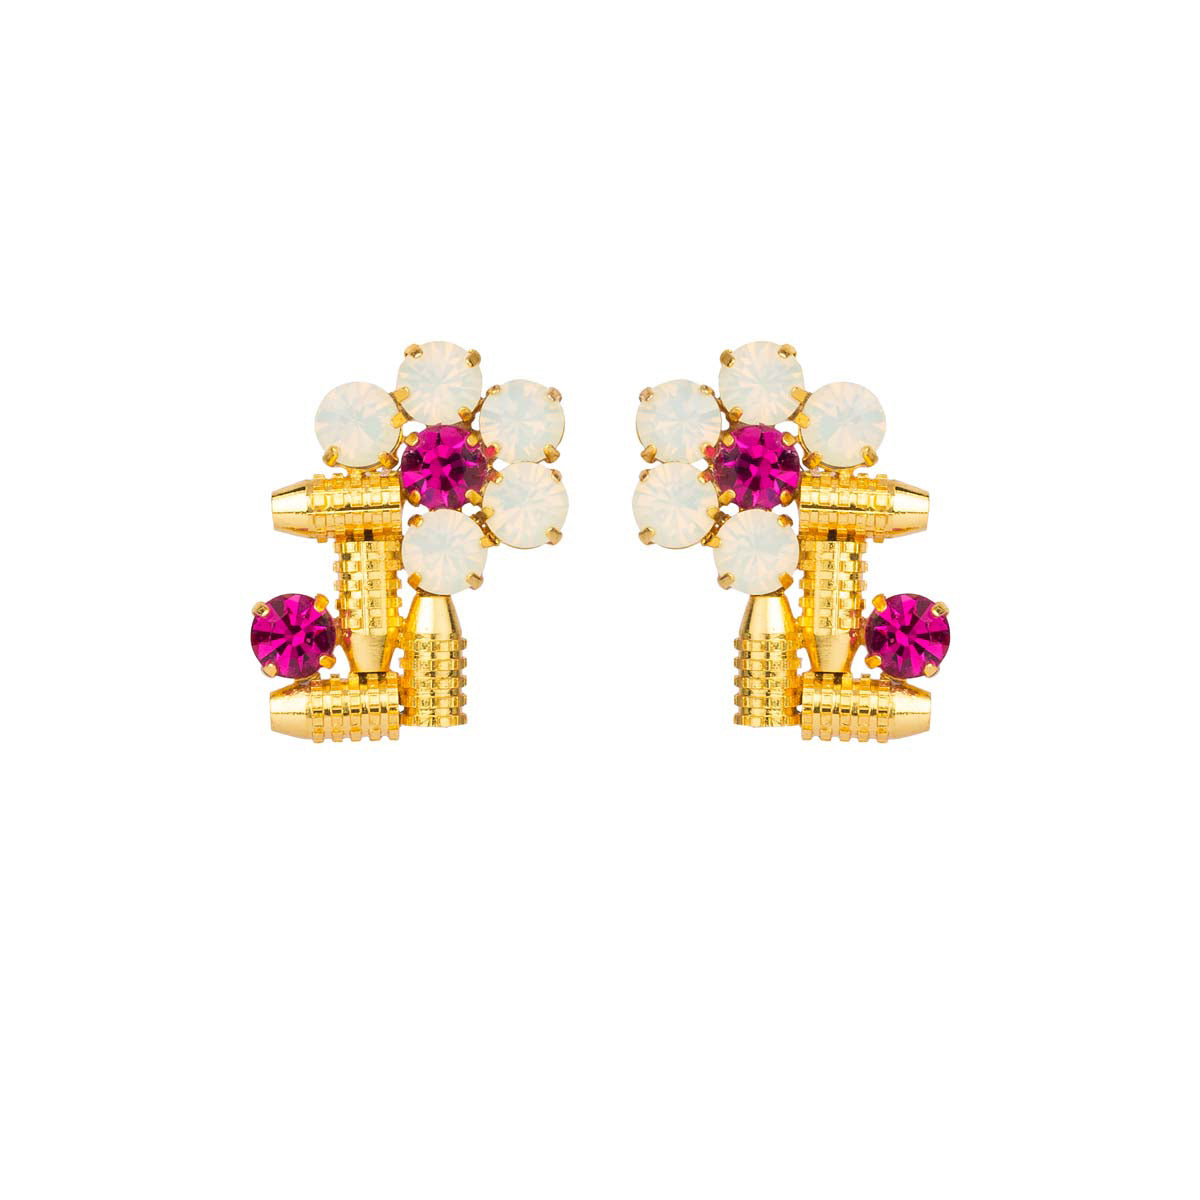 Glitzy, glamorous and gold-toned, our rosena earrings are floral with a fetish for pink. These pieces are crafted from 2 micron gold polished brass and speak of high class and craftsmanship.